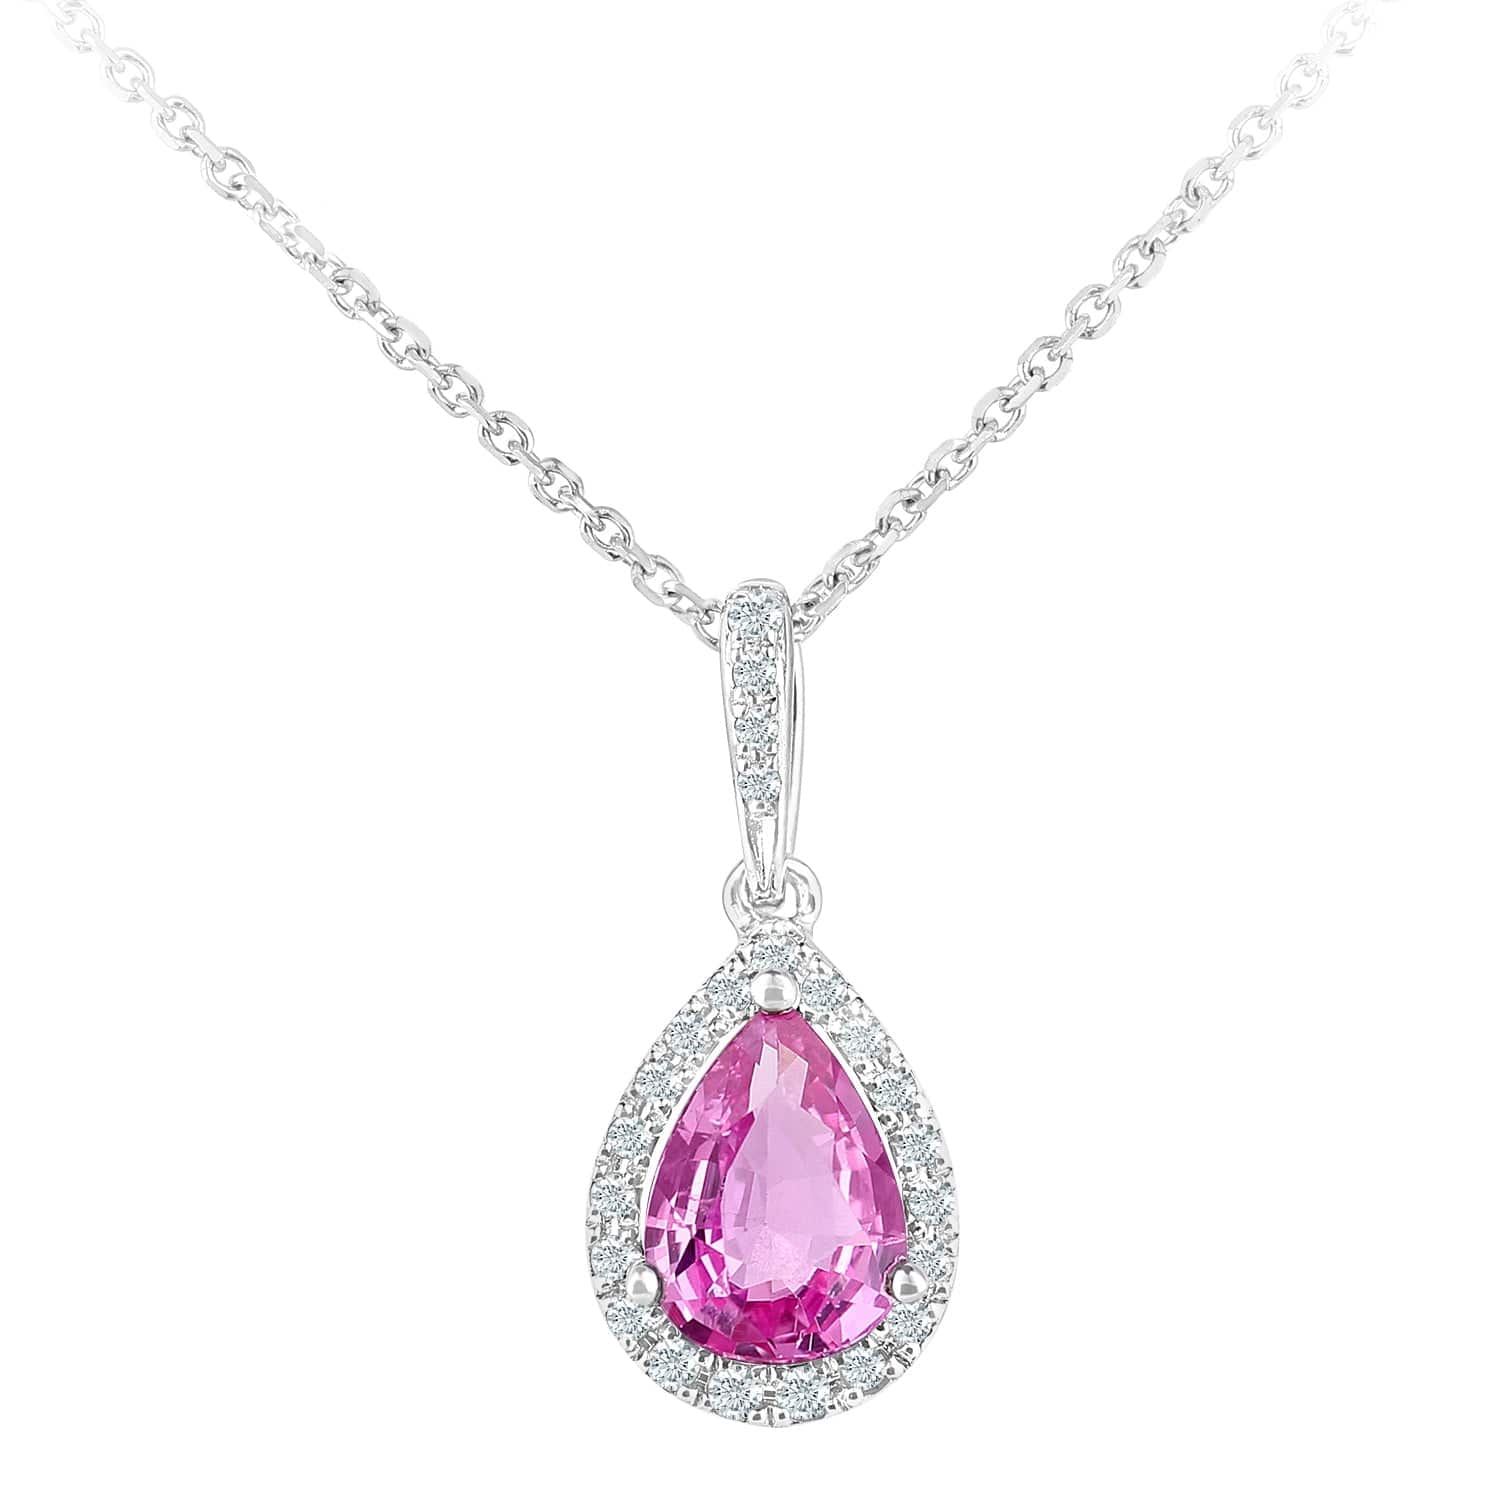 Lynora Luxe Necklace White Gold 9ct / Pink Sapphire / 18" 9ct White Gold Created Pink Sapphire Teardrop and Diamond Halo Pendant Necklace